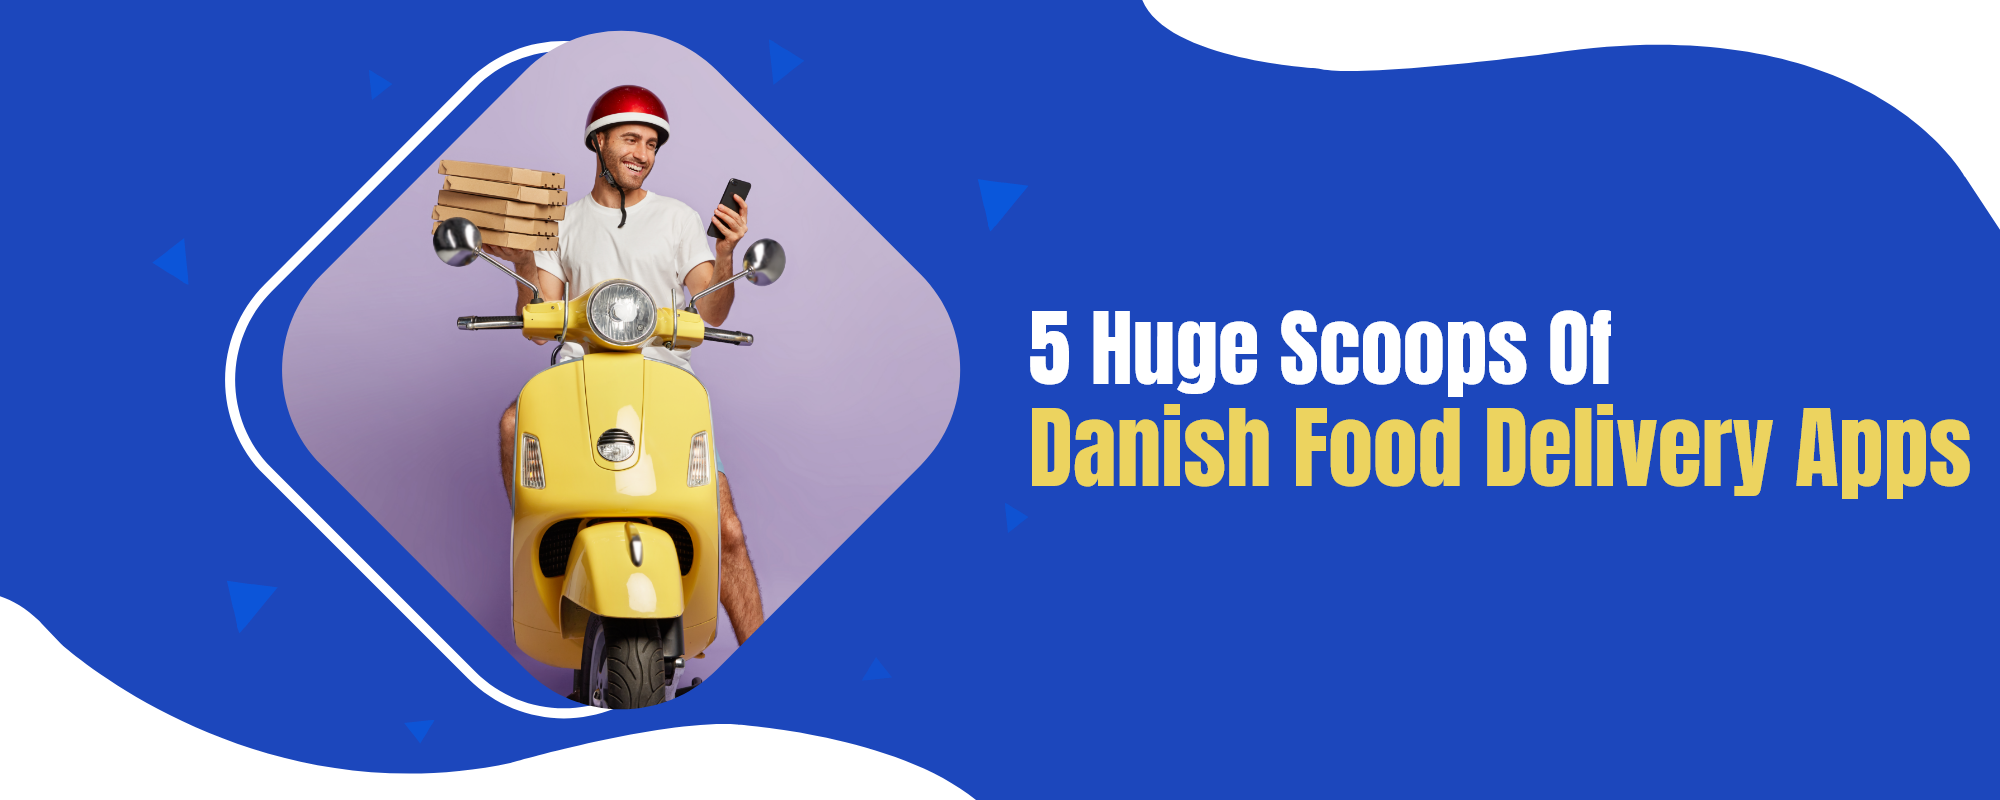 Danish food delivery apps